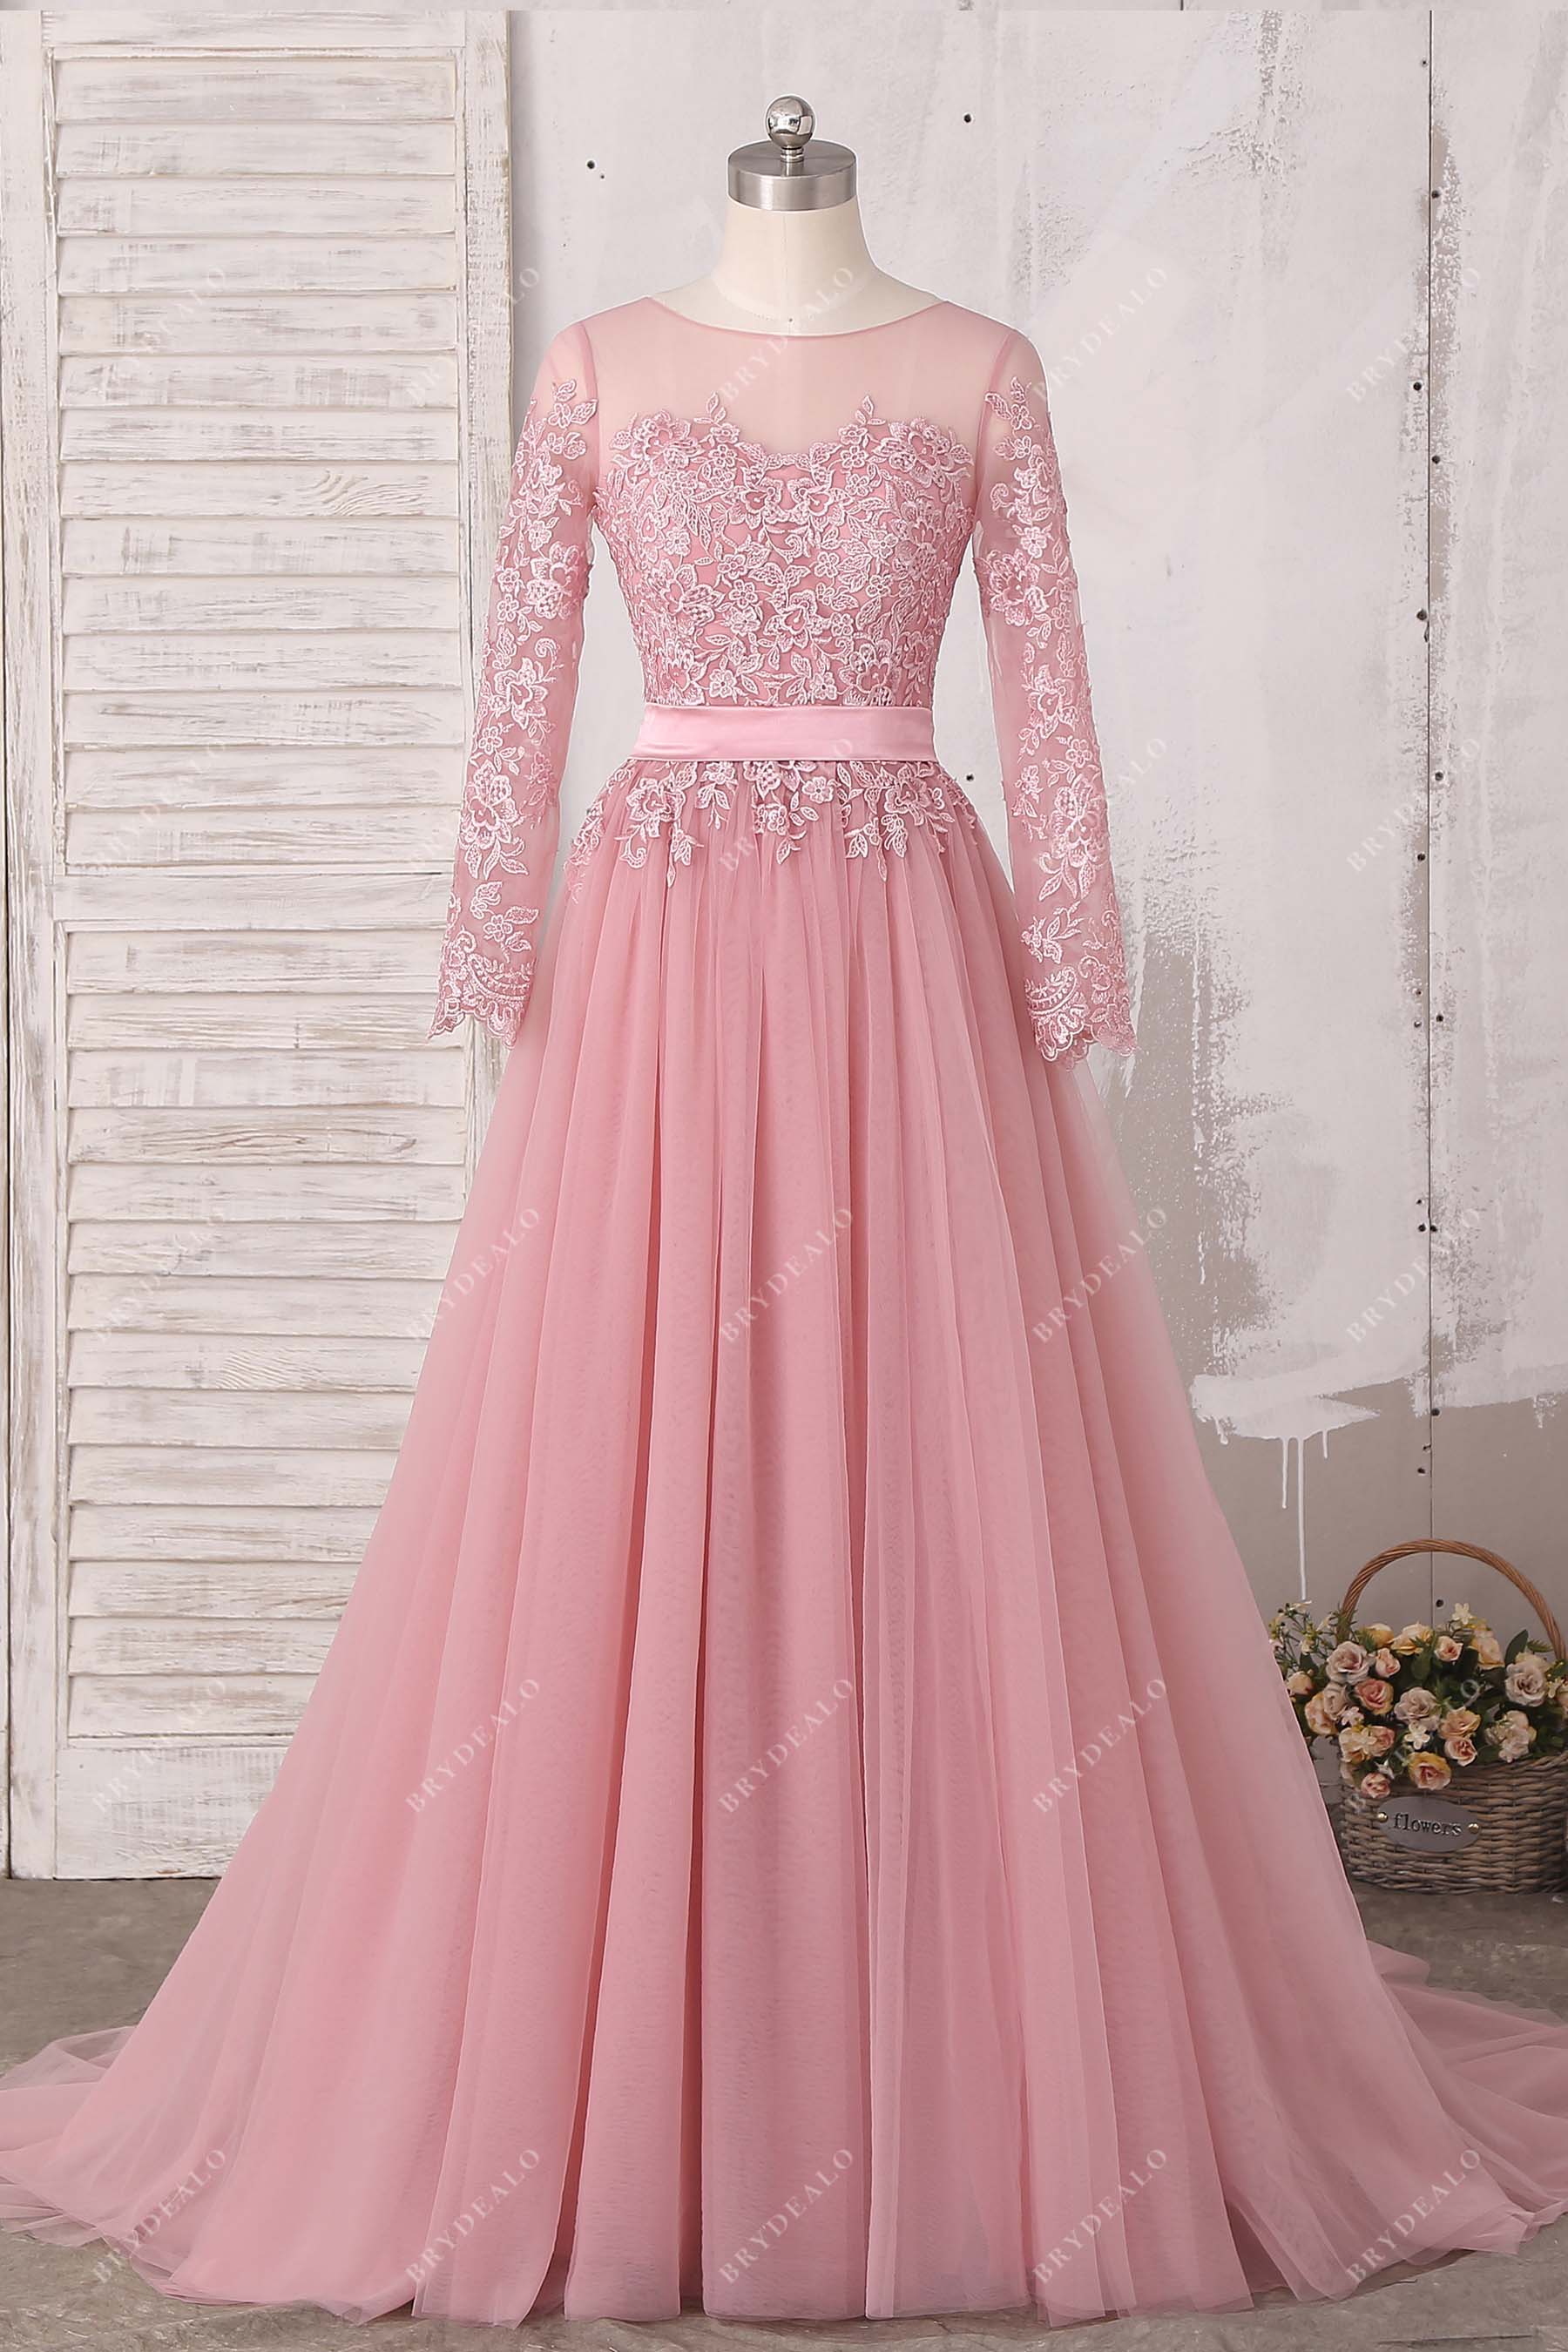 Illusion Lace Dusty Pink Tulle Long Sleeves A-line Wedding Dress